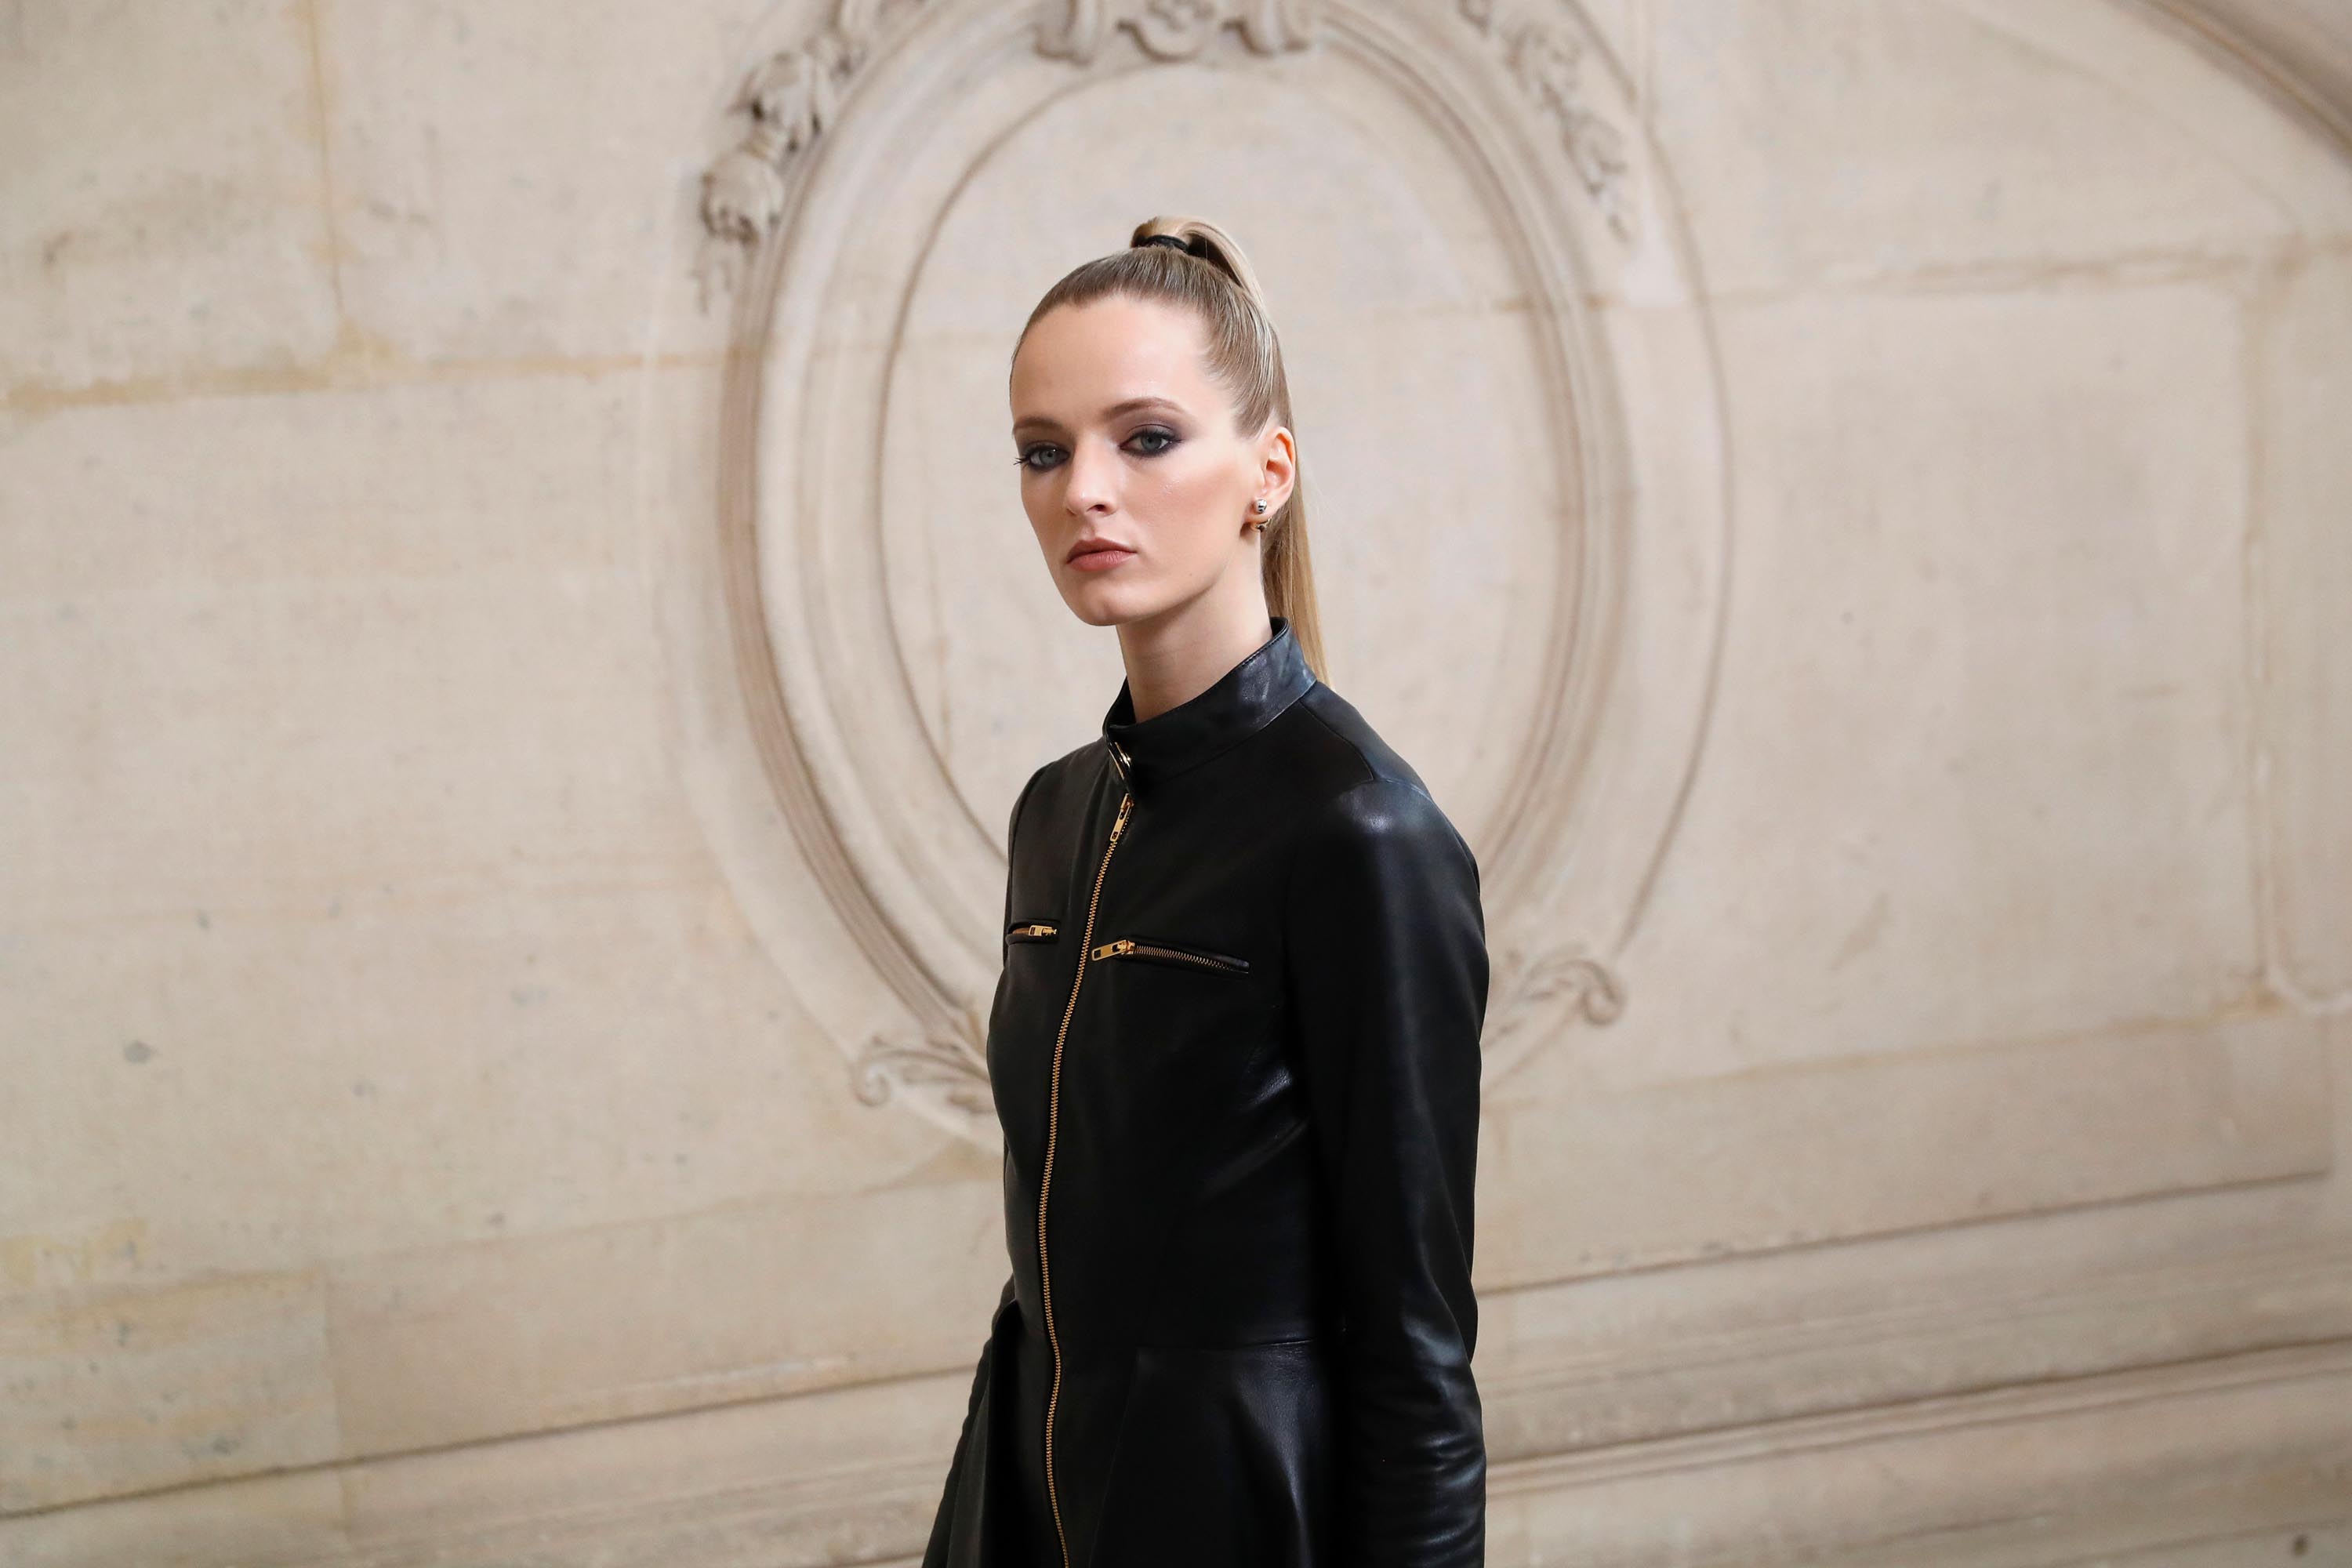 Daria Strokous attends the Christian Dior Haute Couture Spring Summer 2017 show